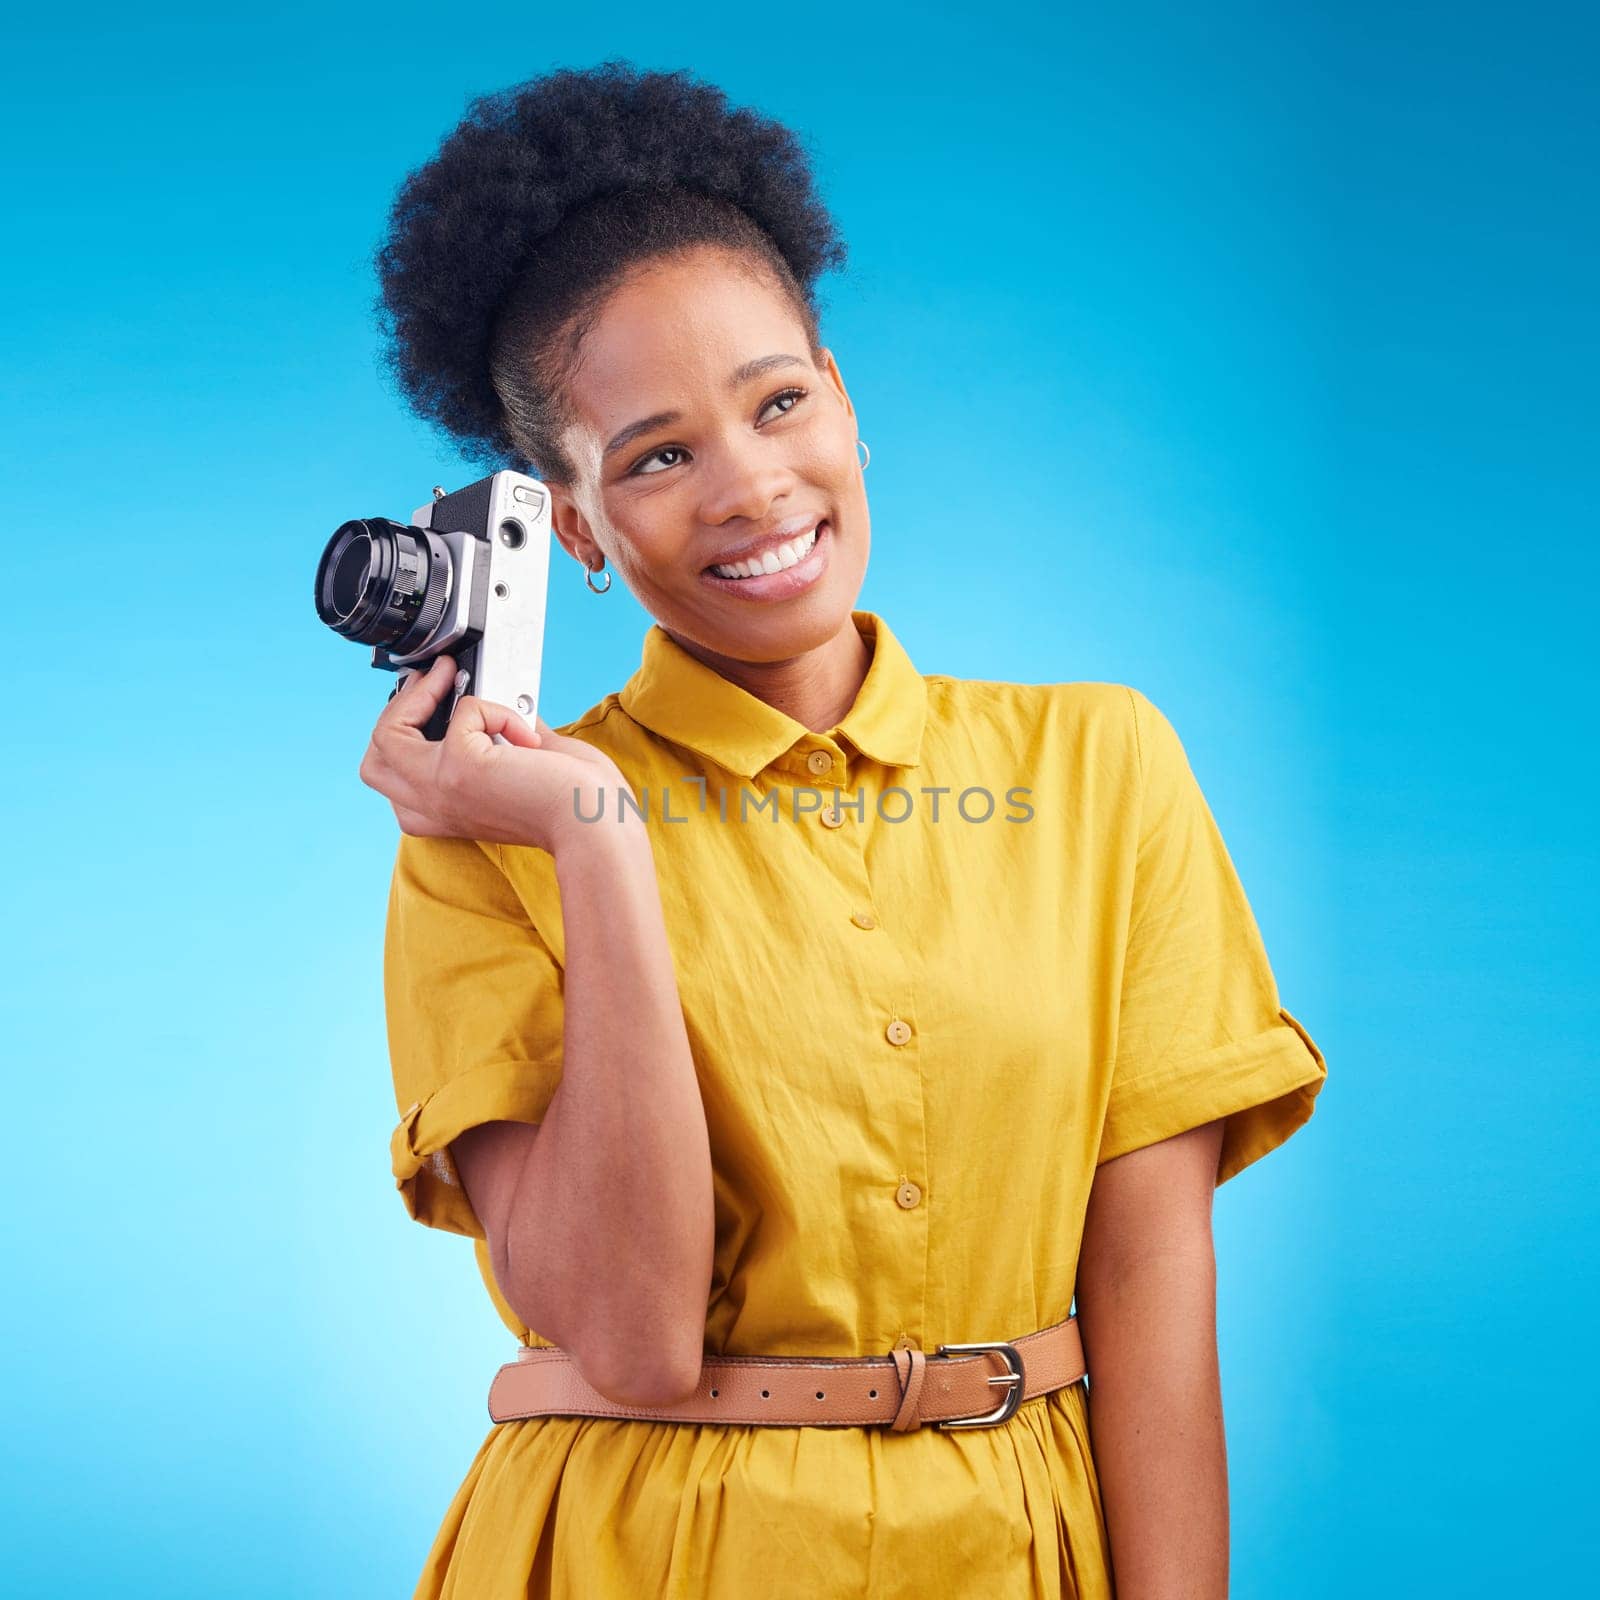 Photography, smile and black woman with camera isolated on blue background, creative artist job and talent. Art, face of happy photographer with hobby or career in studio on travel holiday photoshoot by YuriArcurs